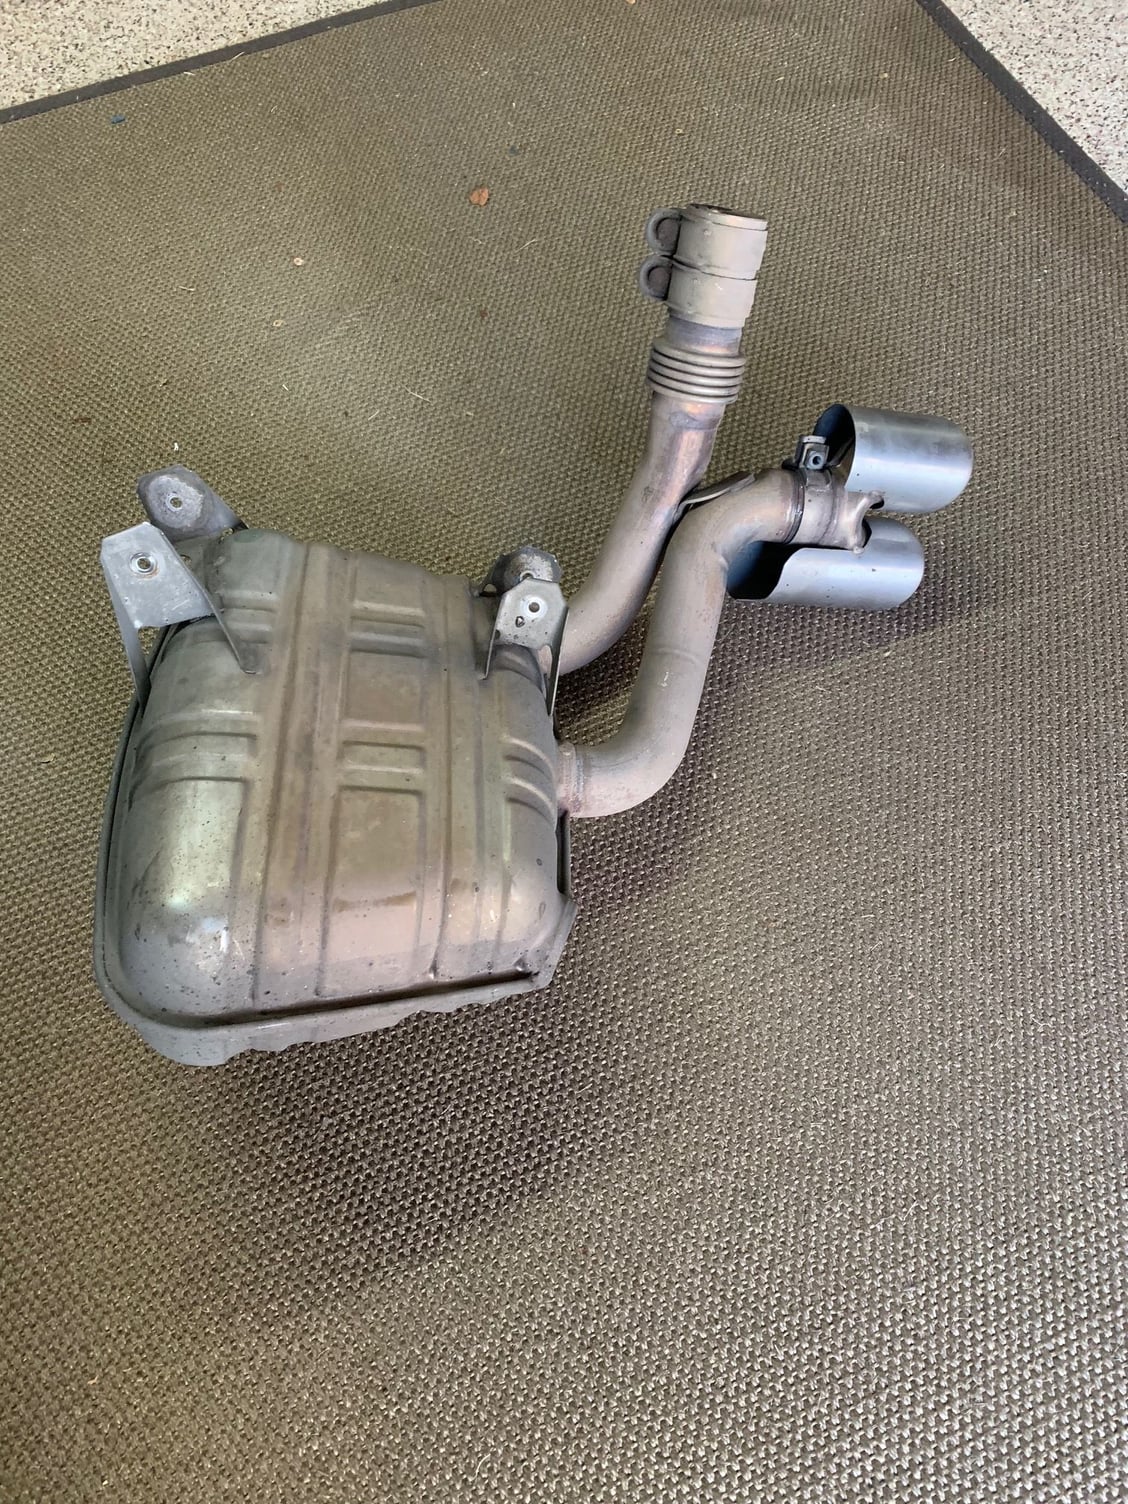 Engine - Exhaust - 997 original exhaust system from 2007 997.1 - Used - 2005 to 2008 Porsche 911 - Tulsa, OK 74137, United States